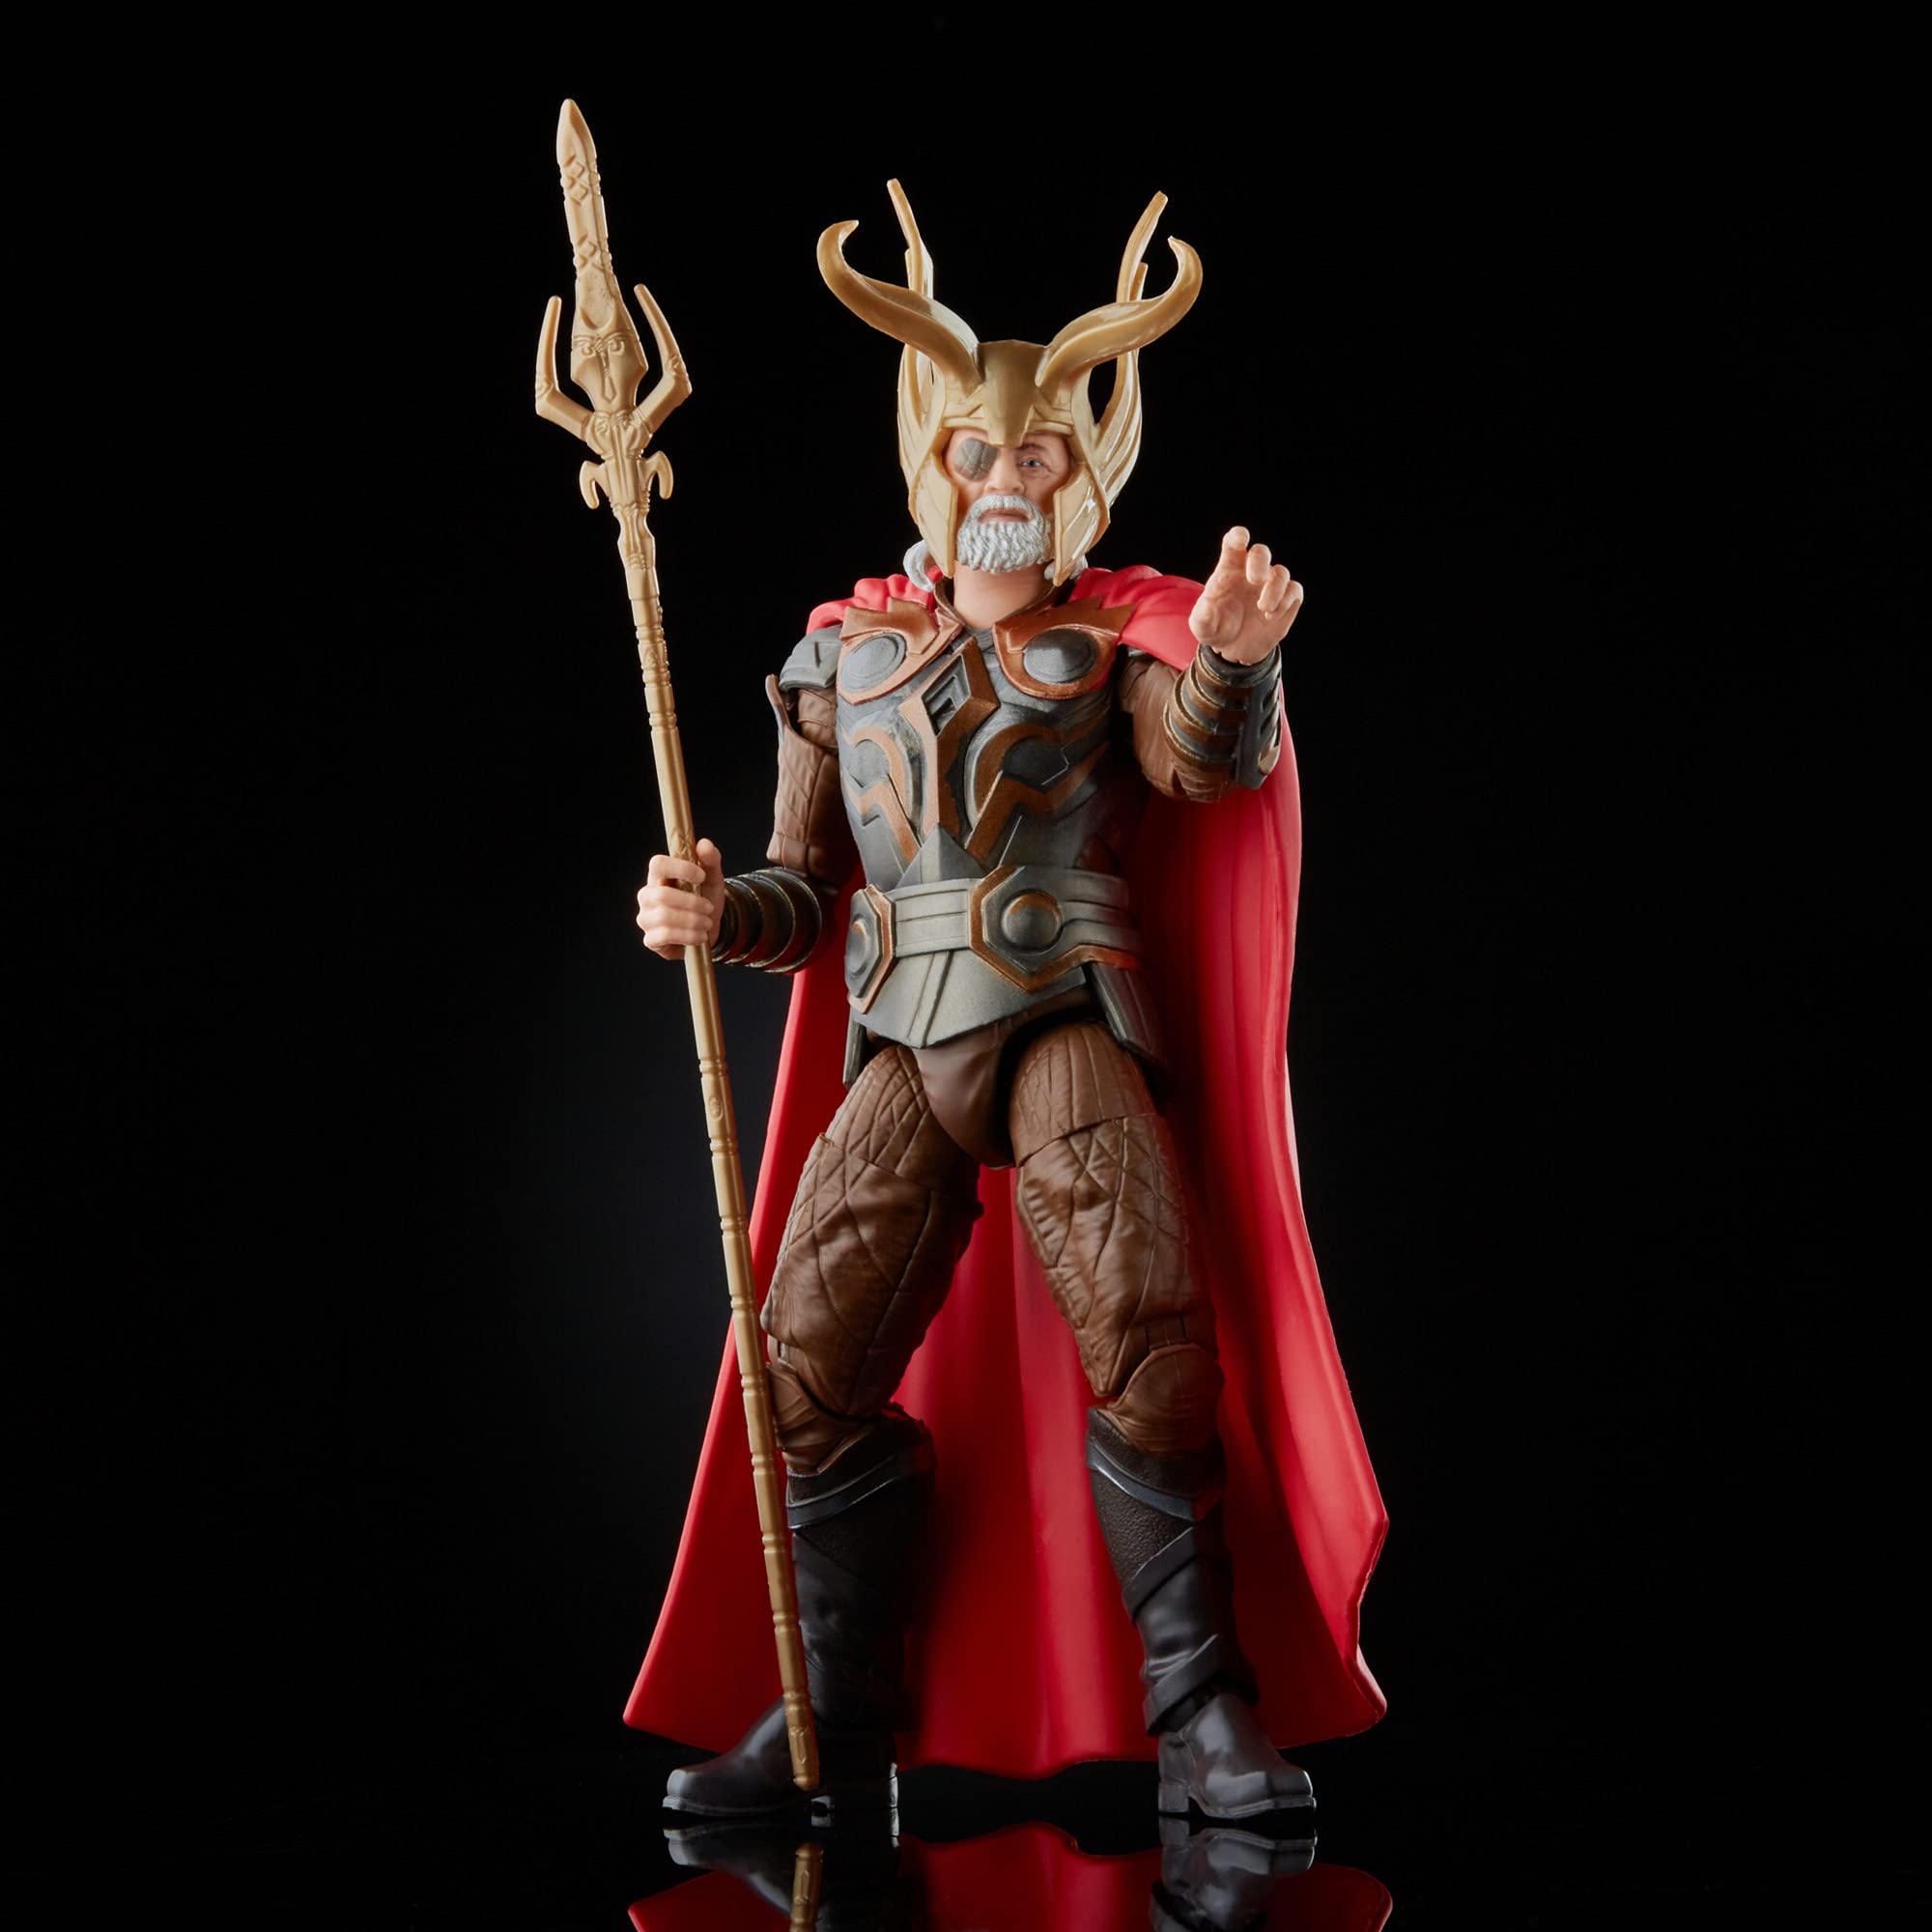 Marvel Hasbro Legends Series 6-inch Scale Action Figure Toy Odin, Infinity Saga Character, Premium Design, Figure and 4 Accessories